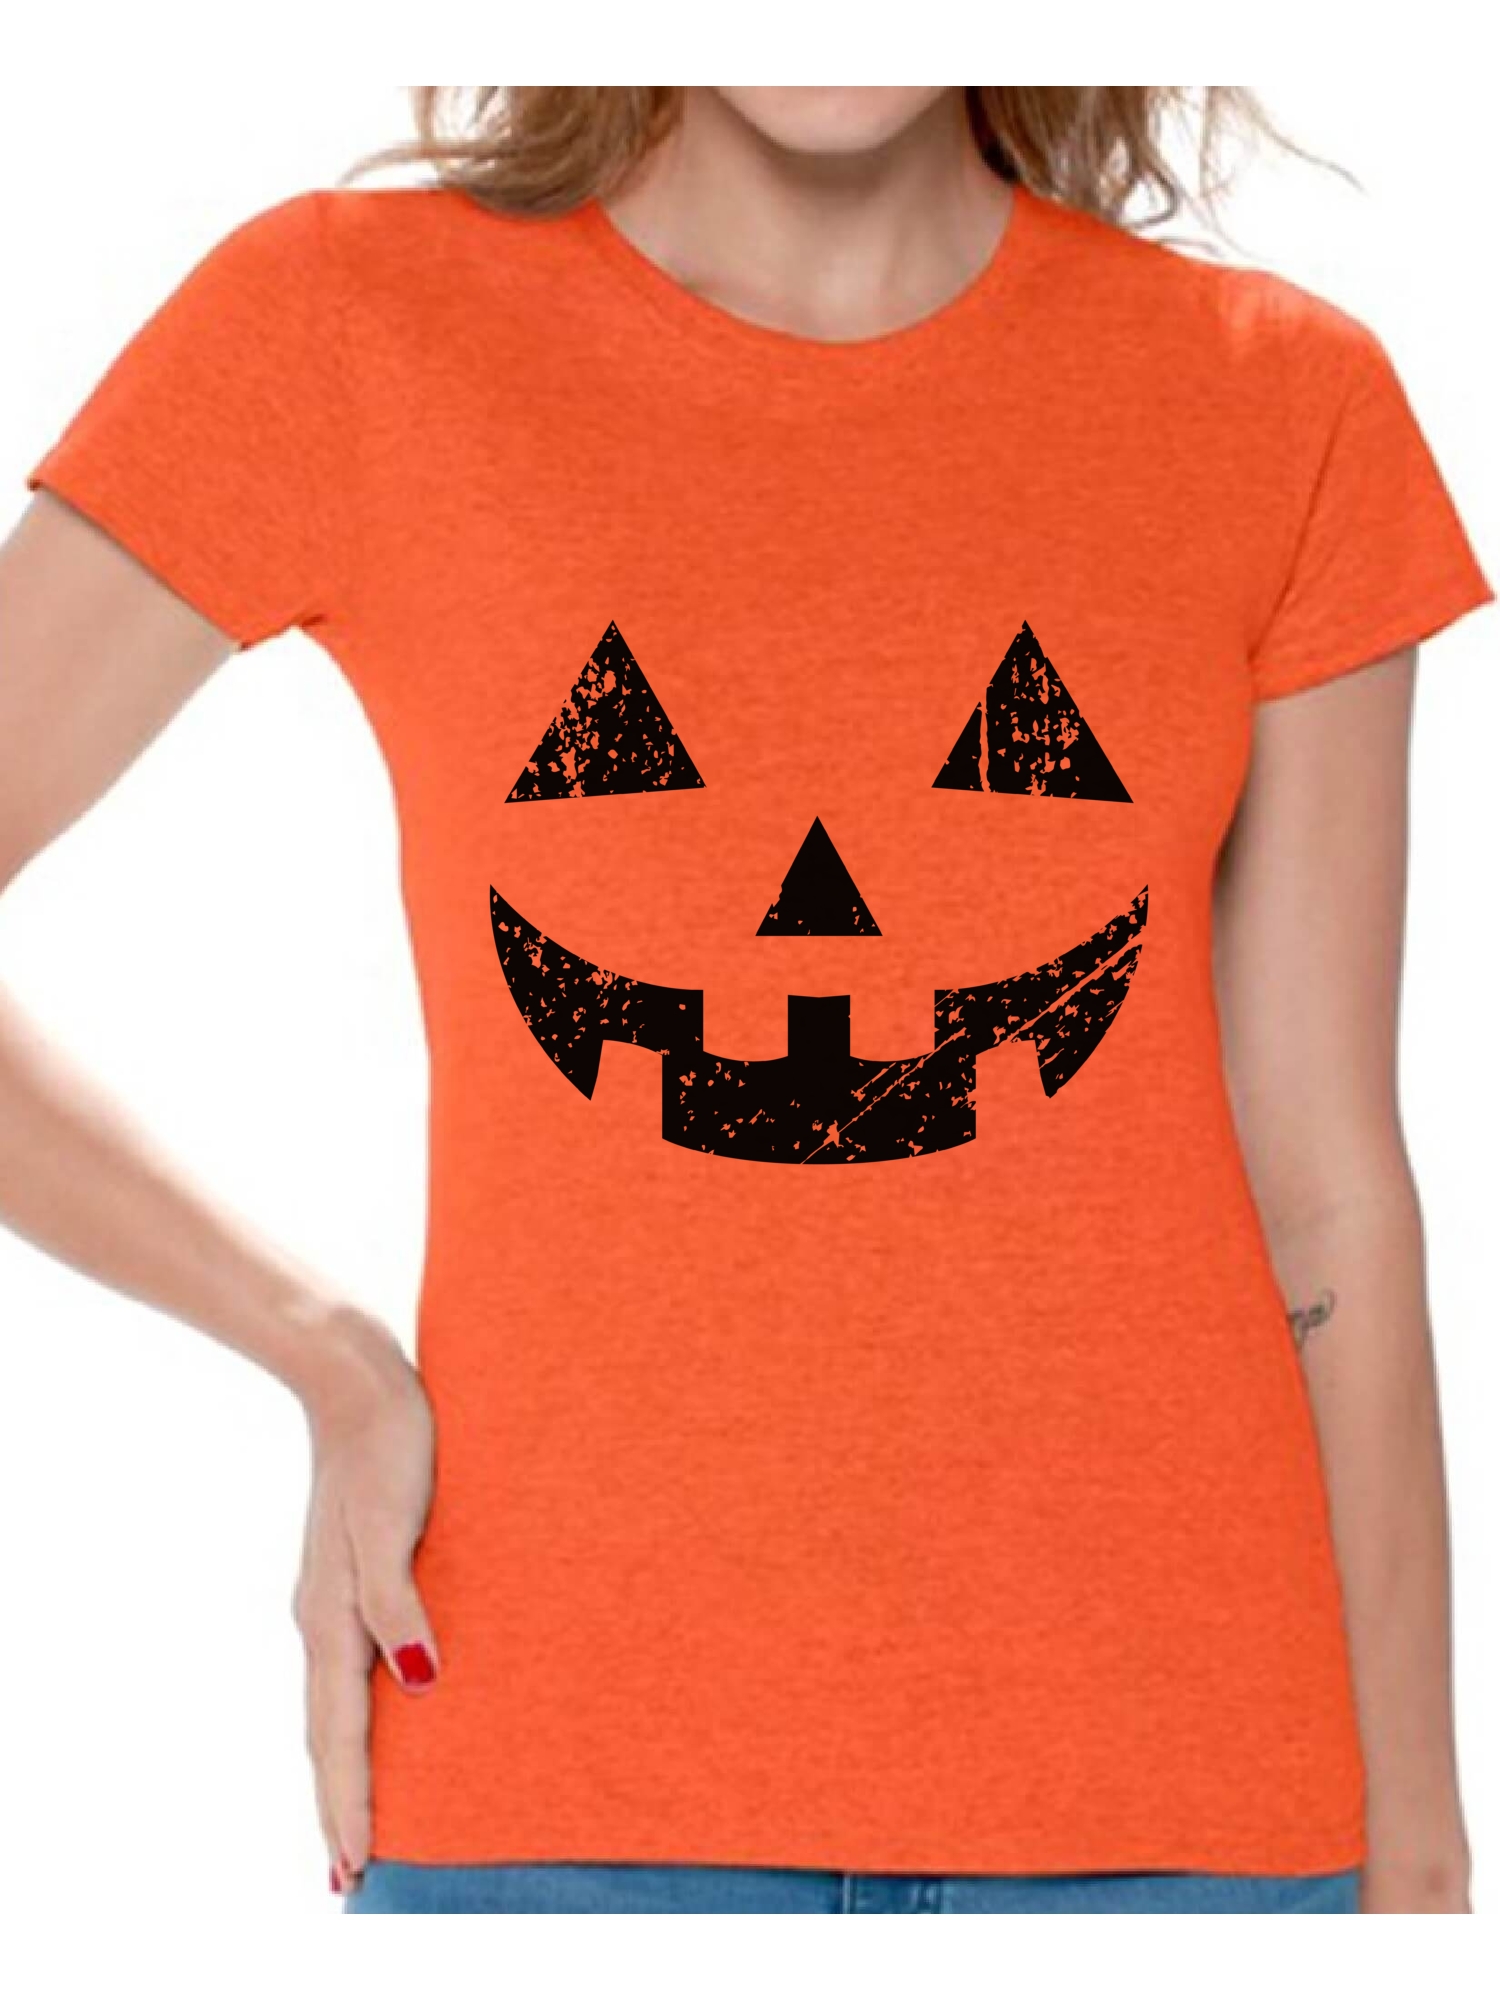 Halloween Pumpkin Print Tops for Women Lady O-Neck Long Sleeve Shirts Casual Loose Blouses